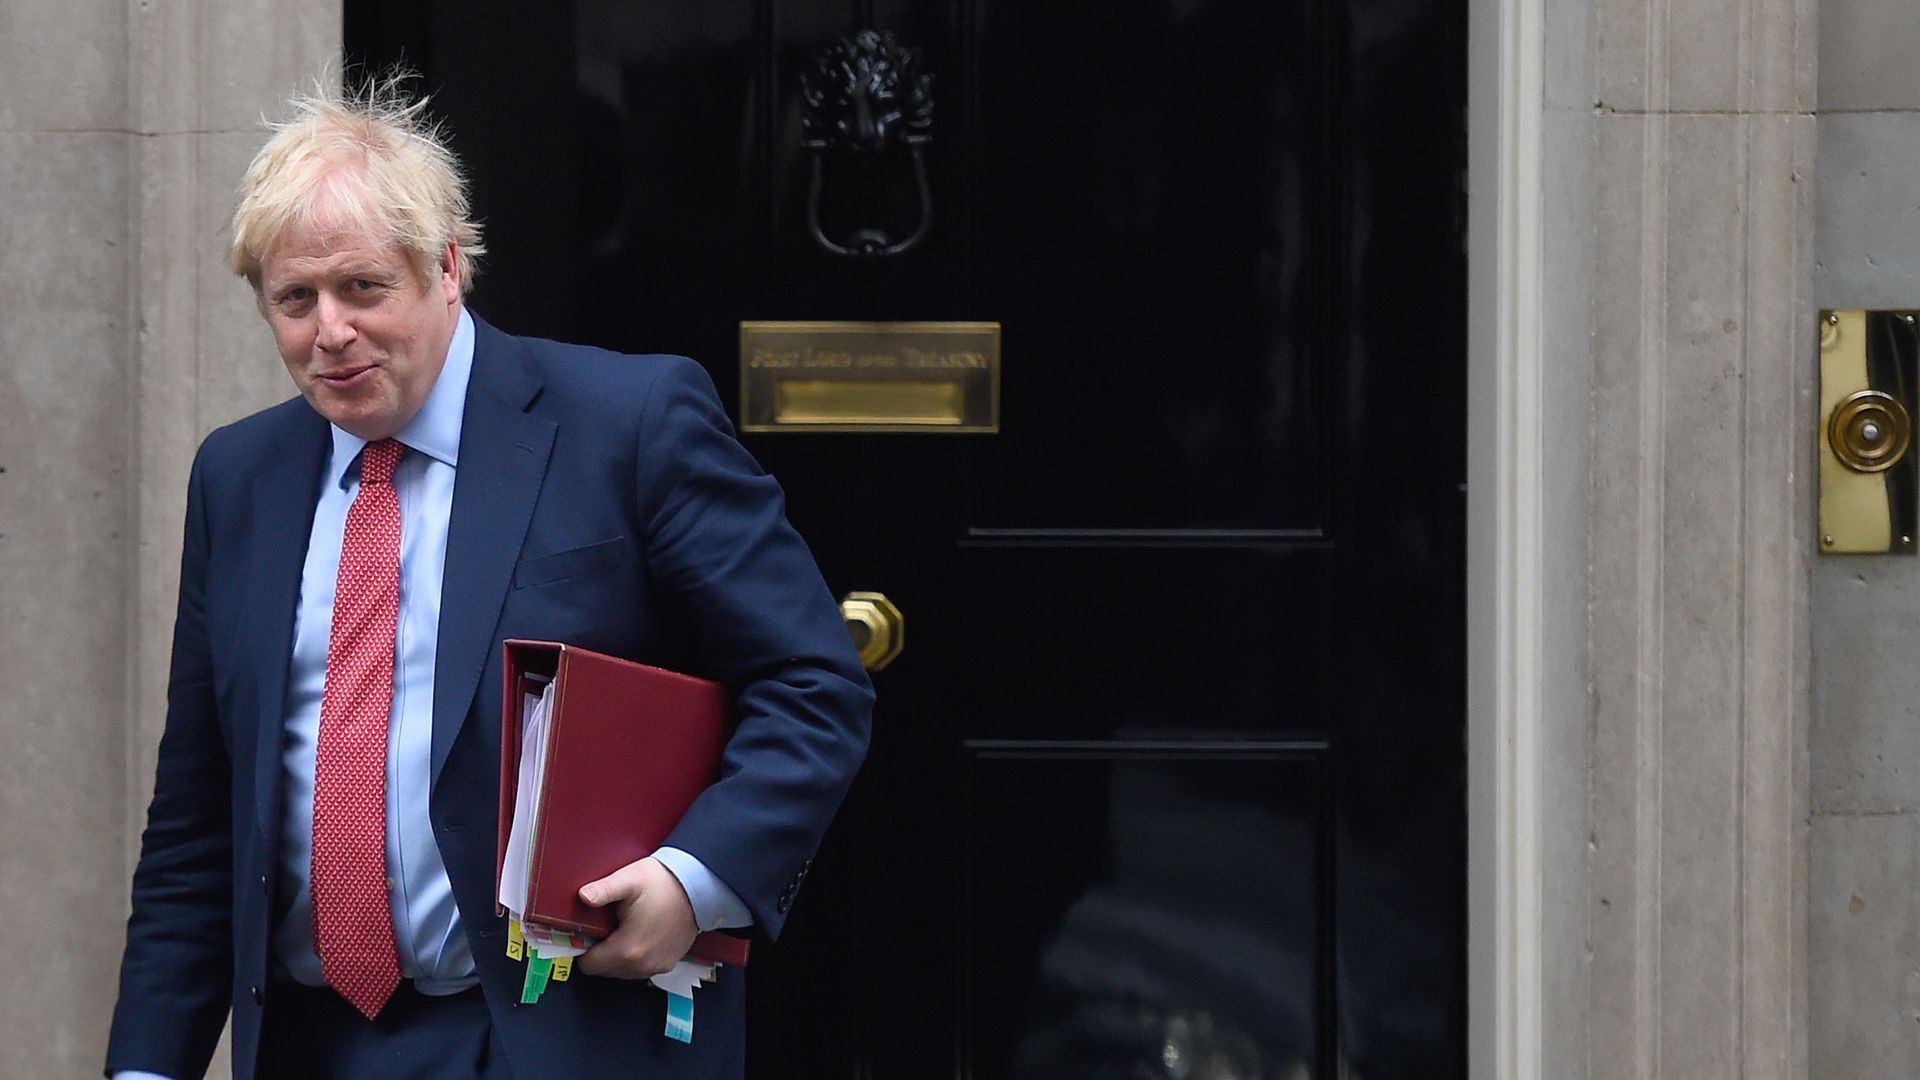 : British Prime Minister Boris Johnson leaves 10 Downing Street ahead of the weekly PMQs session on January 22, 2020 in London, England.